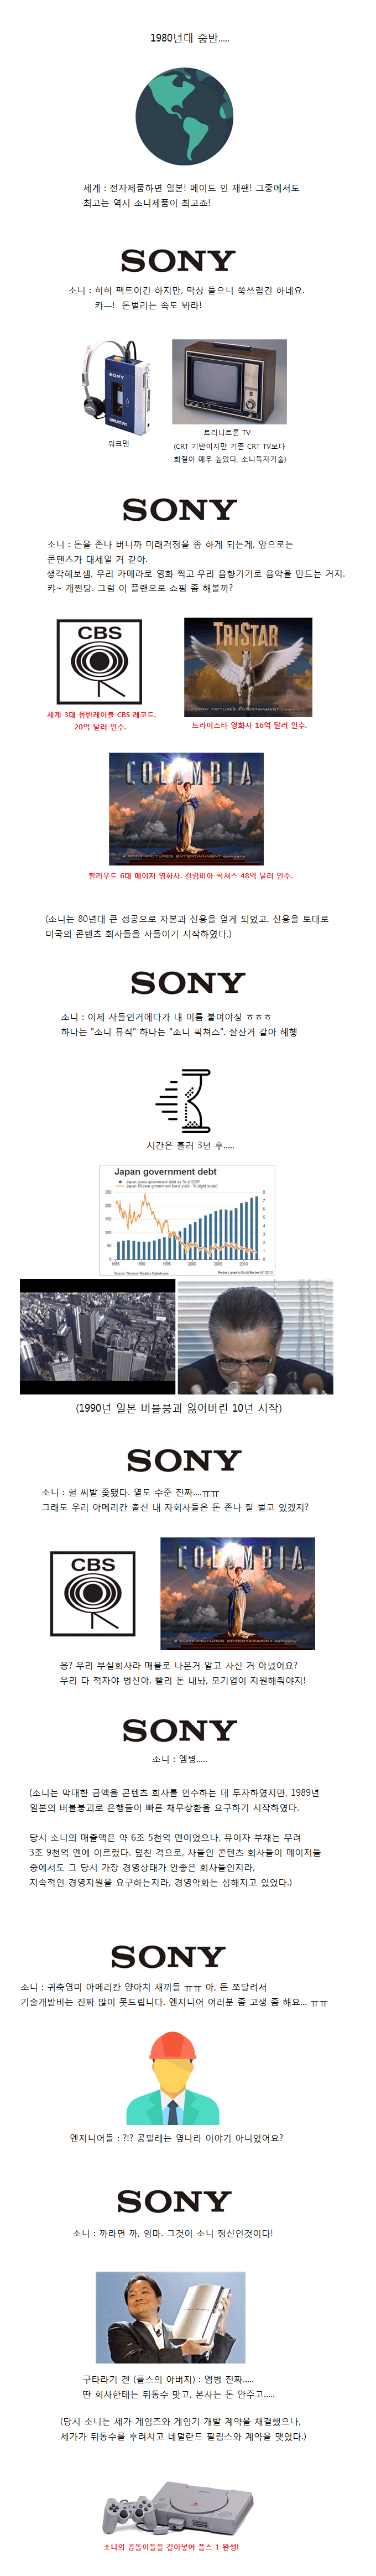 sony01.png